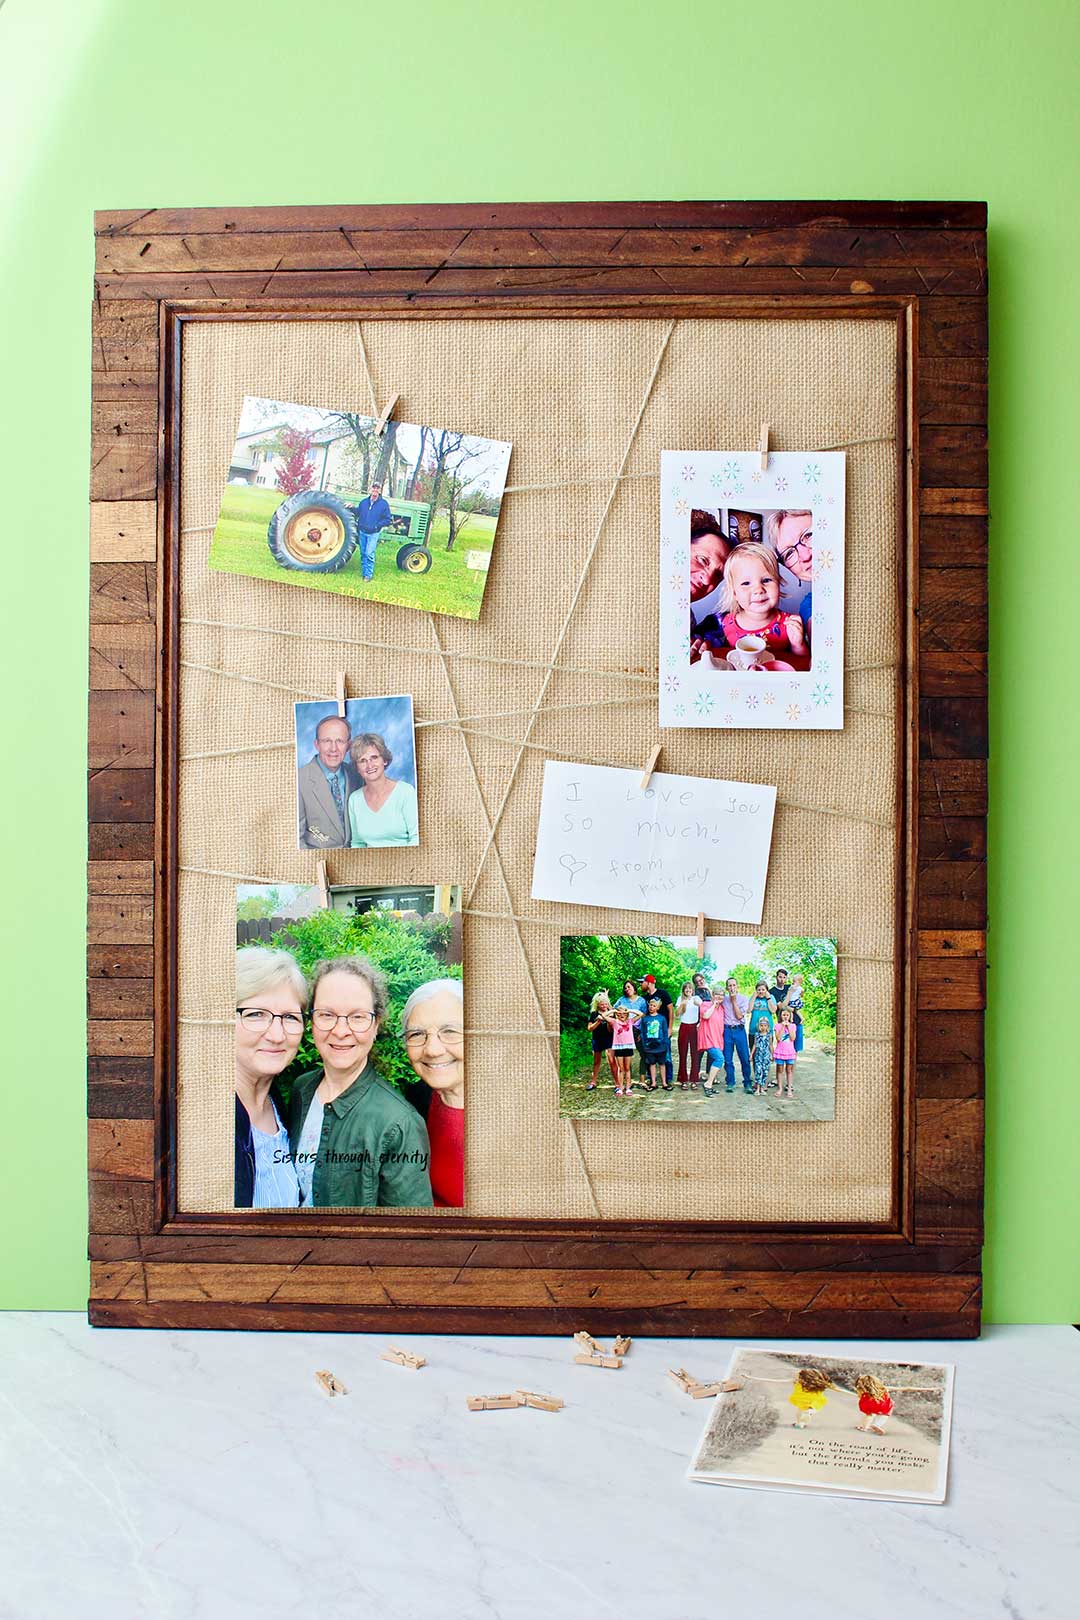 Full view of completed Upcycled Picture Frame with photos attached to criss crossed twine with clothes pins on frame with burlap backing leaning against a lime green background.